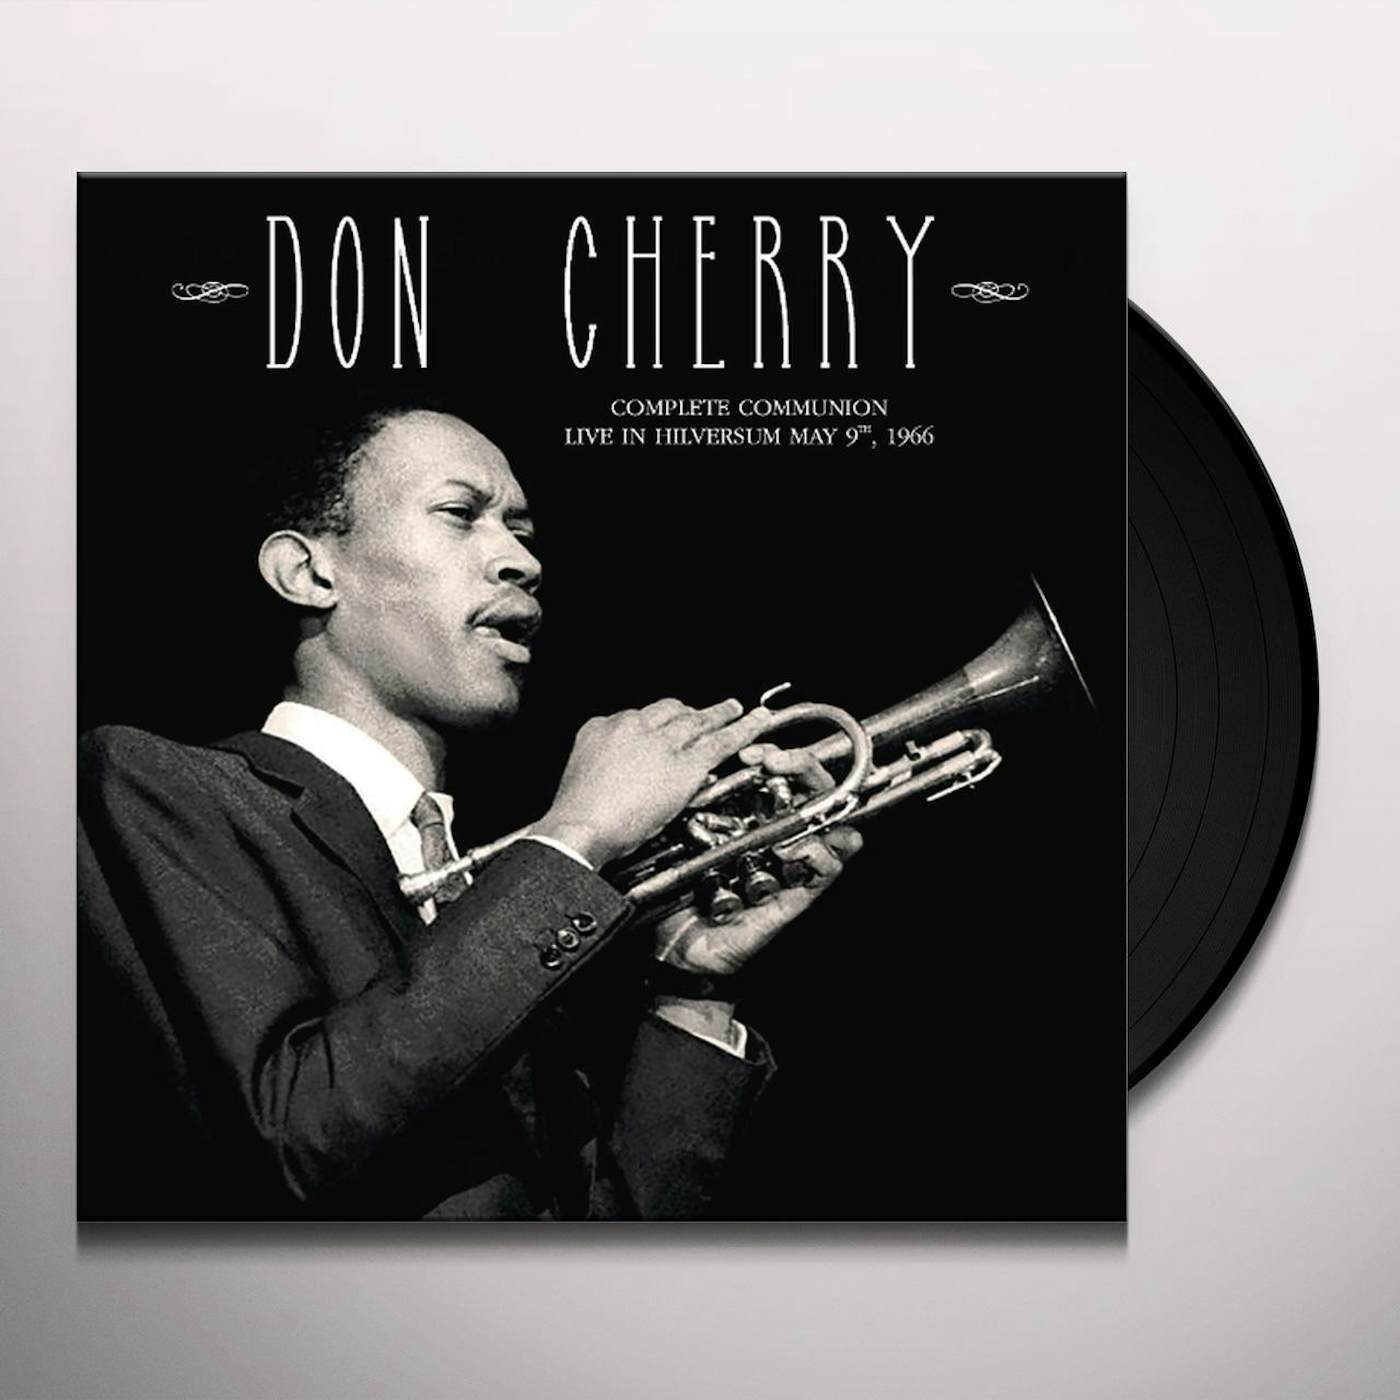 Don Cherry COMPLETE COMMUNION: LIVE IN HILVERSUM MAY 9TH 1966 Vinyl Record